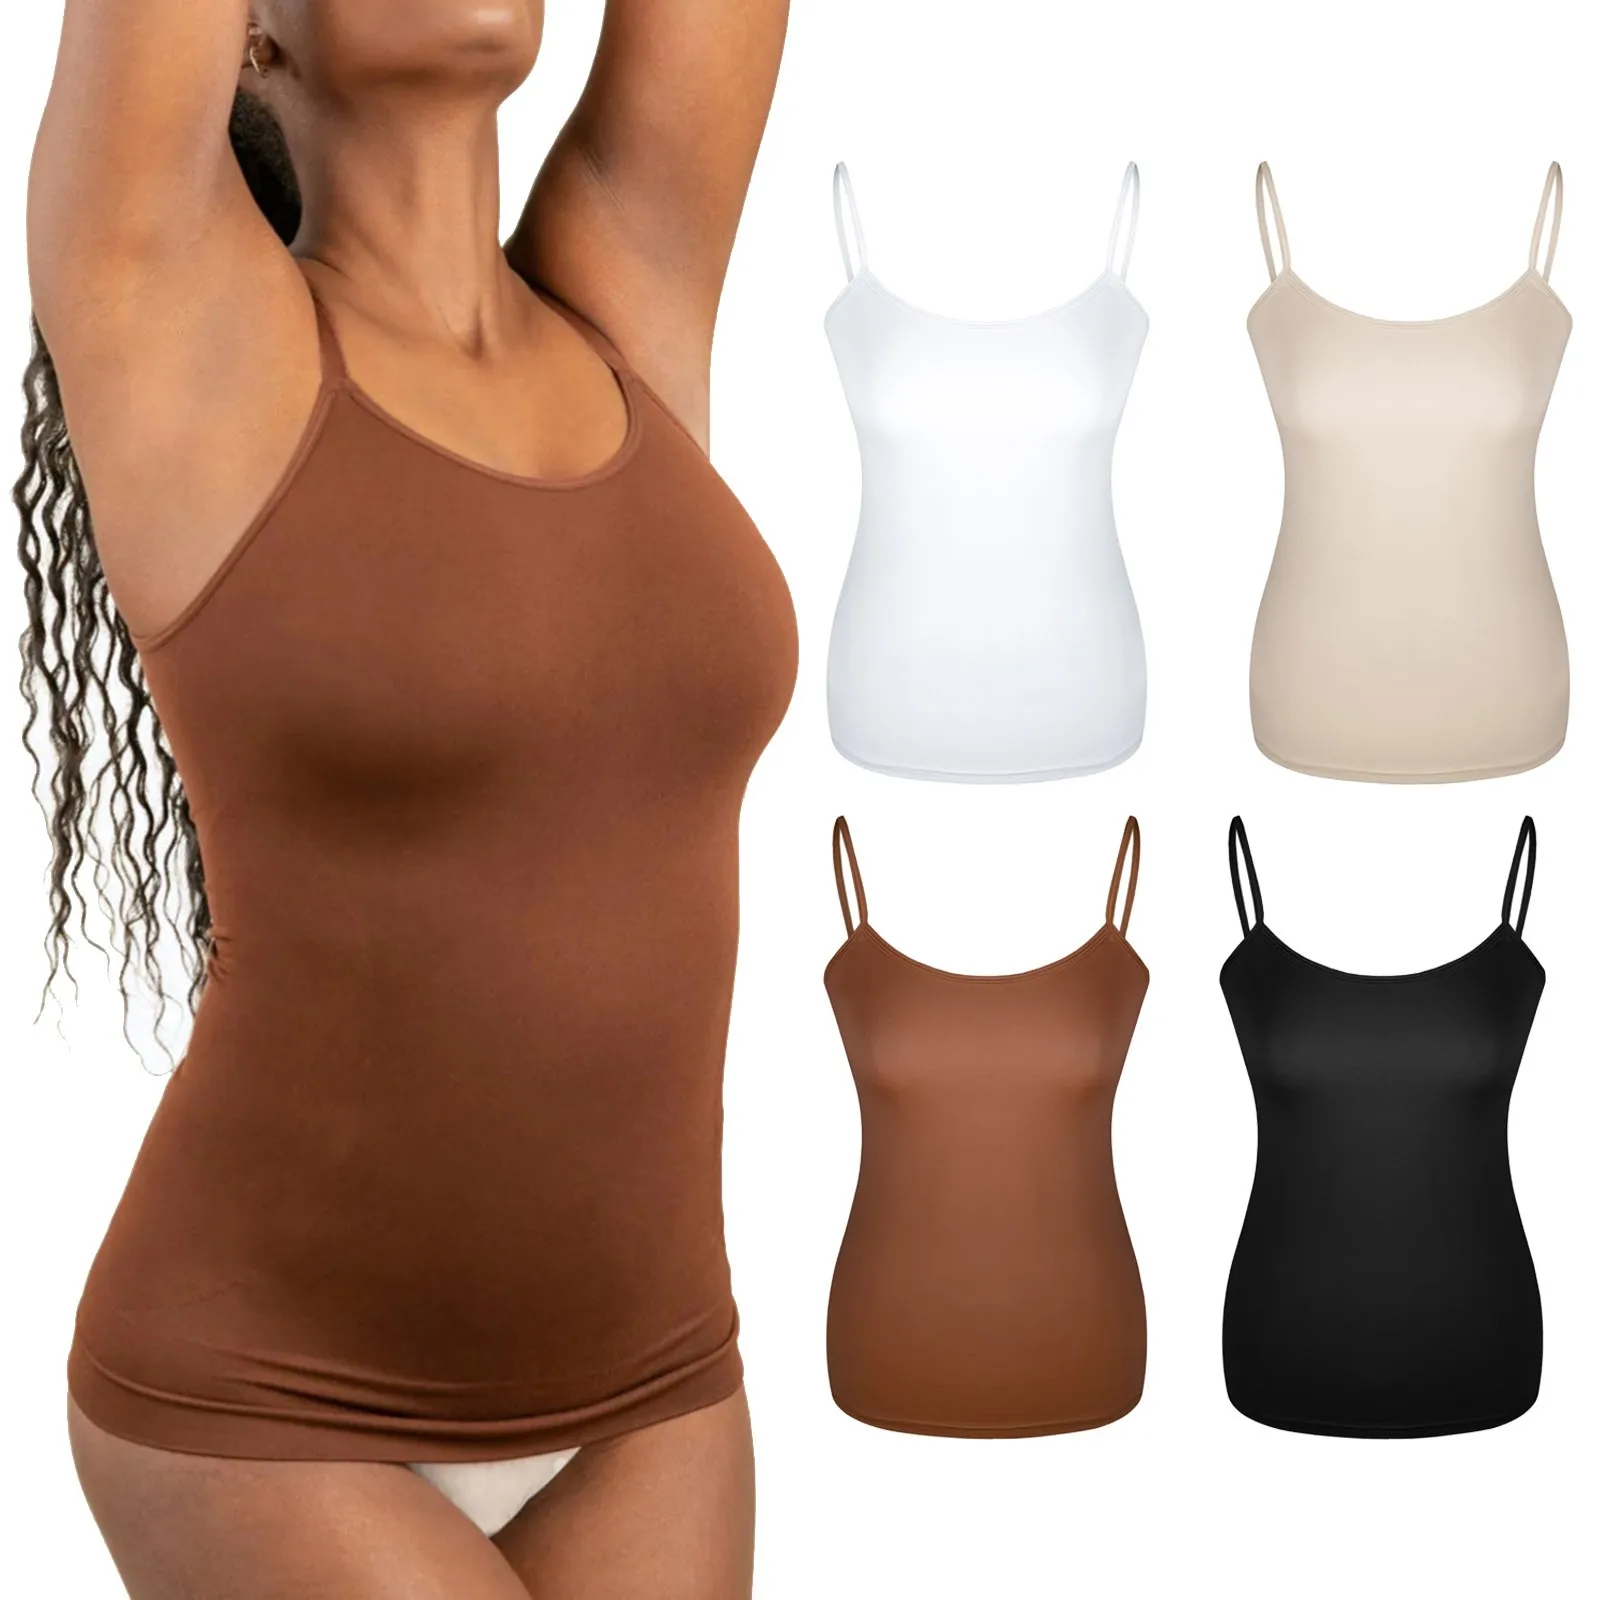 Women's Shapewear Camisole Tank Tops Scoop Neck Compression Cami